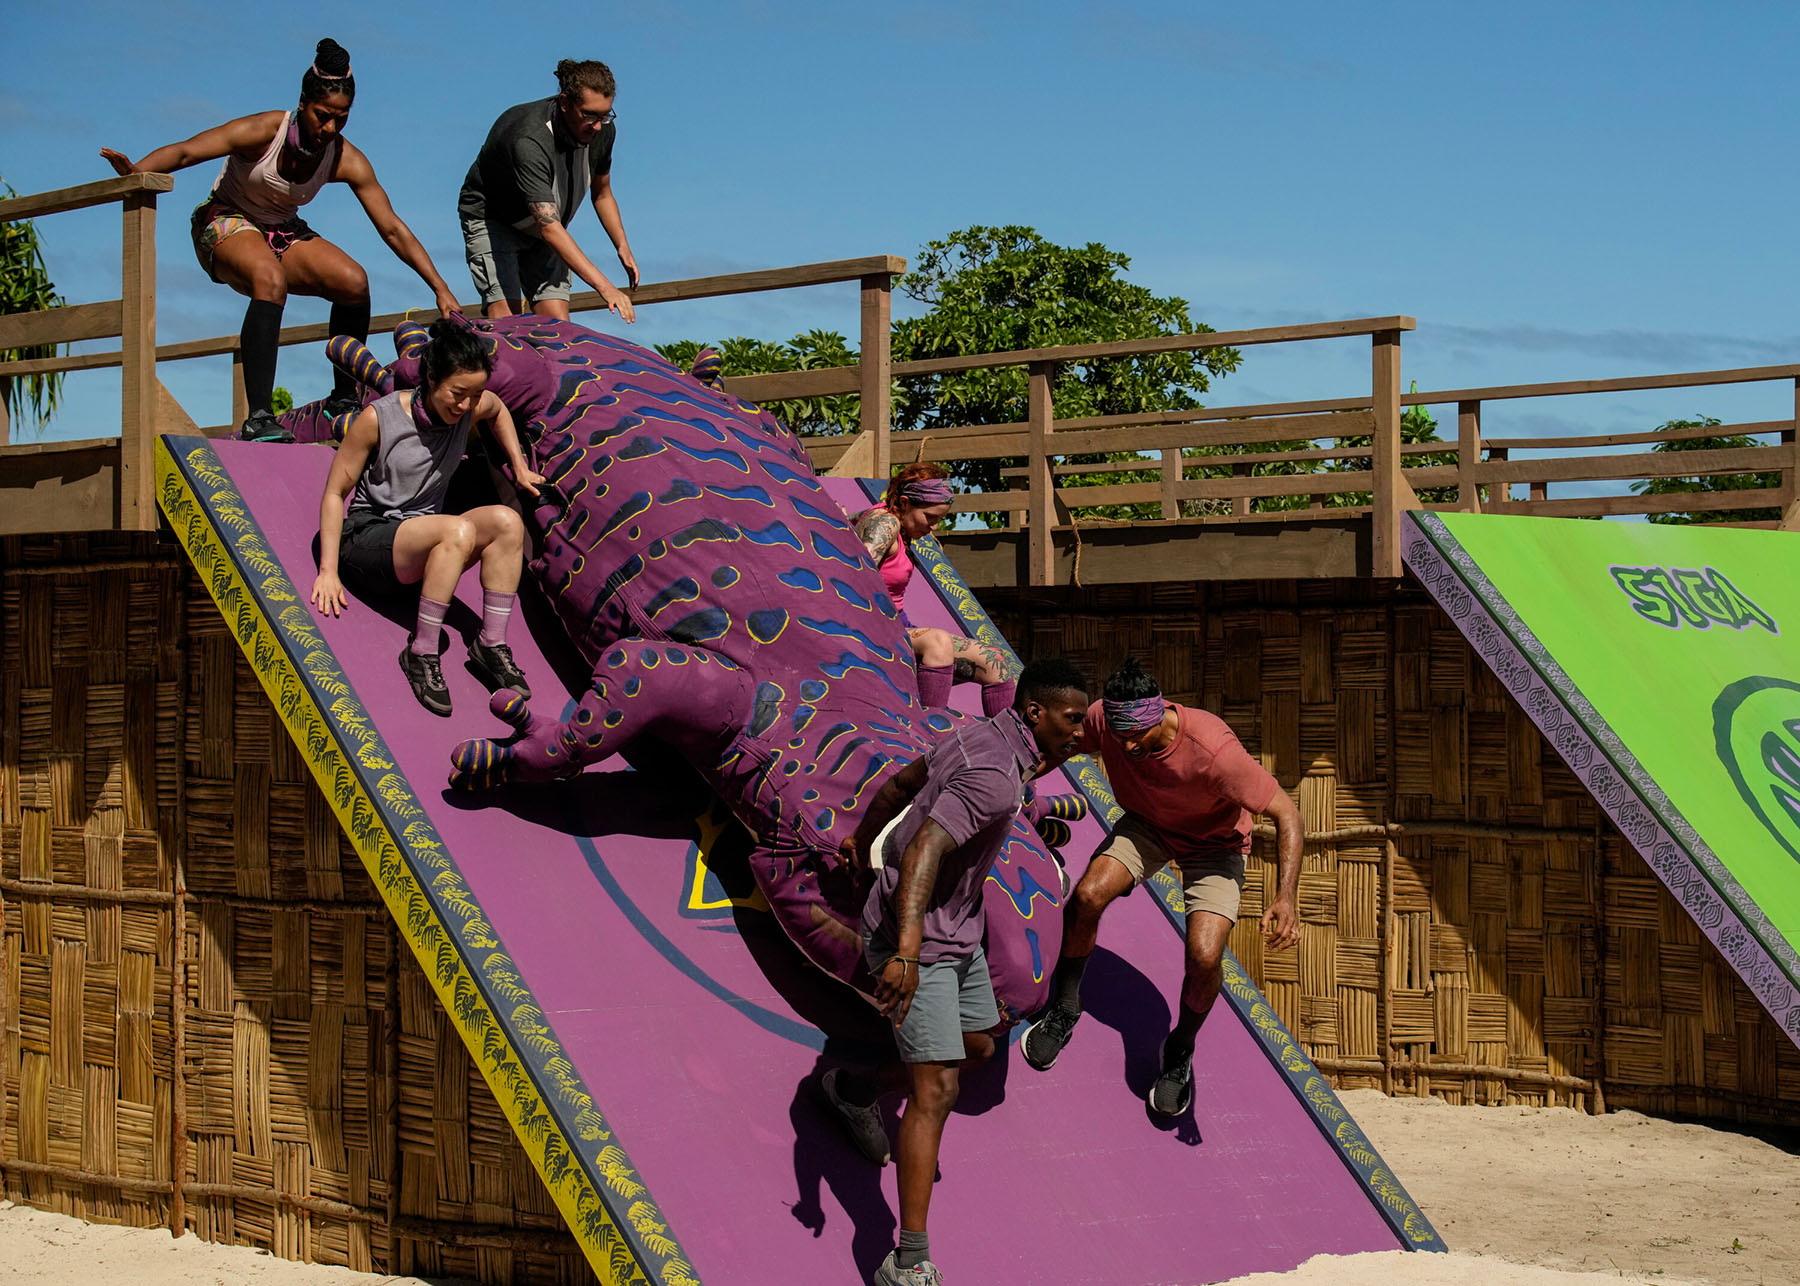 A large wooden platform with a slide at the end. There are five people maneuvering a large purple lizard down the slide in an attempt to win a race.